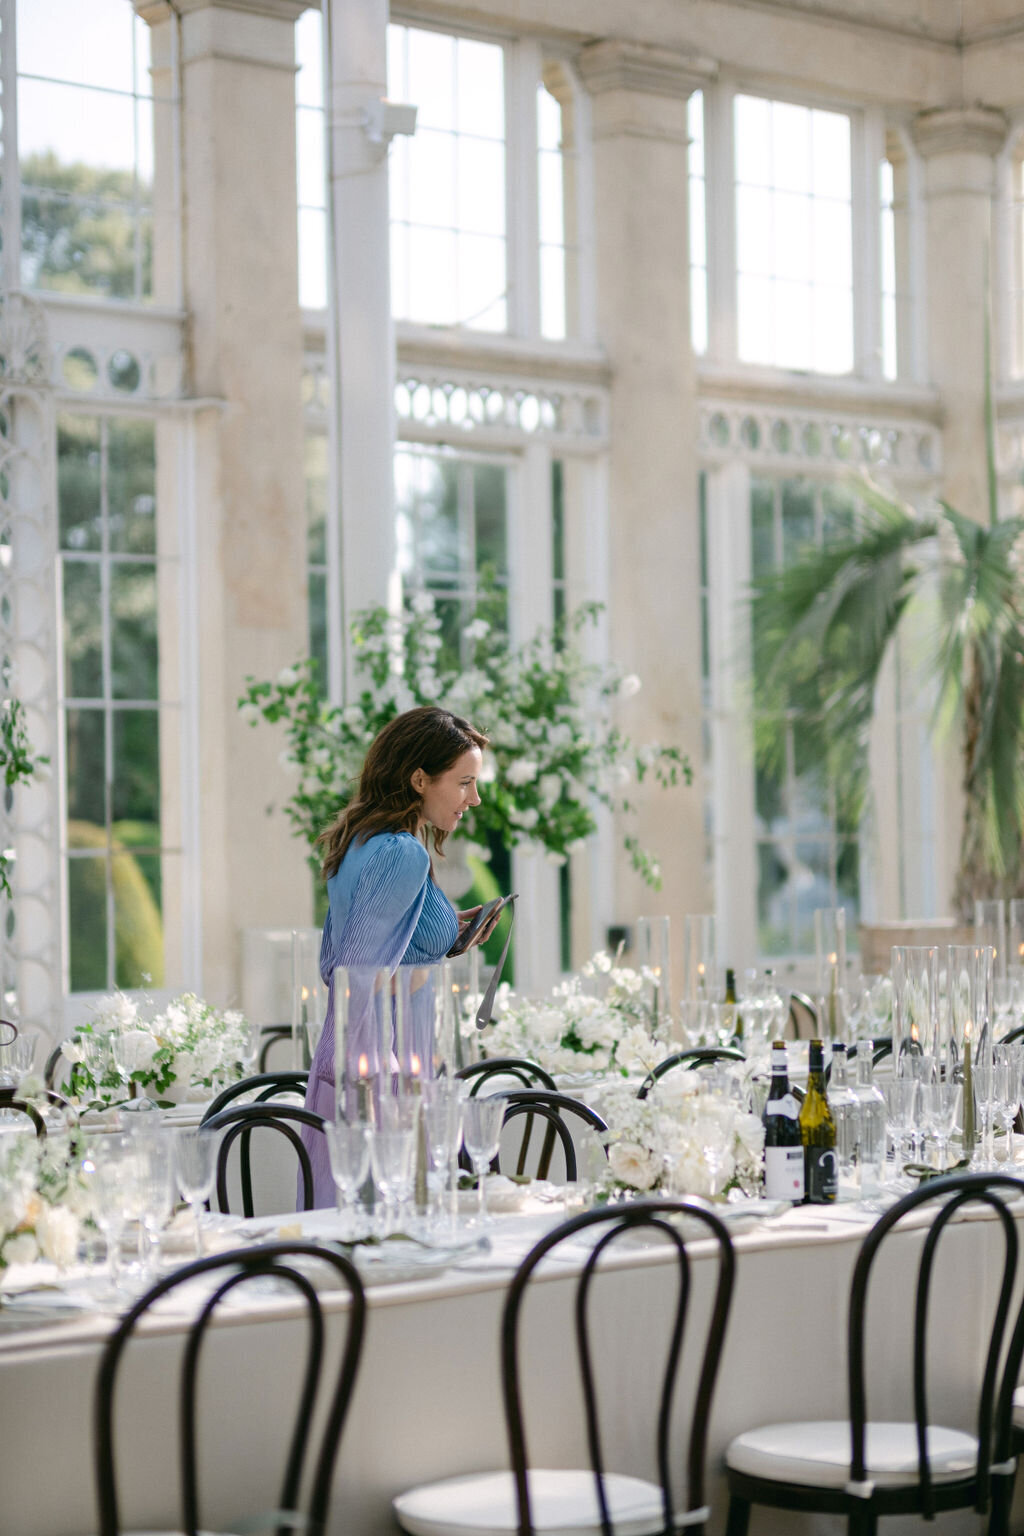 Attabara Studio UK Luxury Wedding Planners at Syon Park & with Charlotte Wise0931